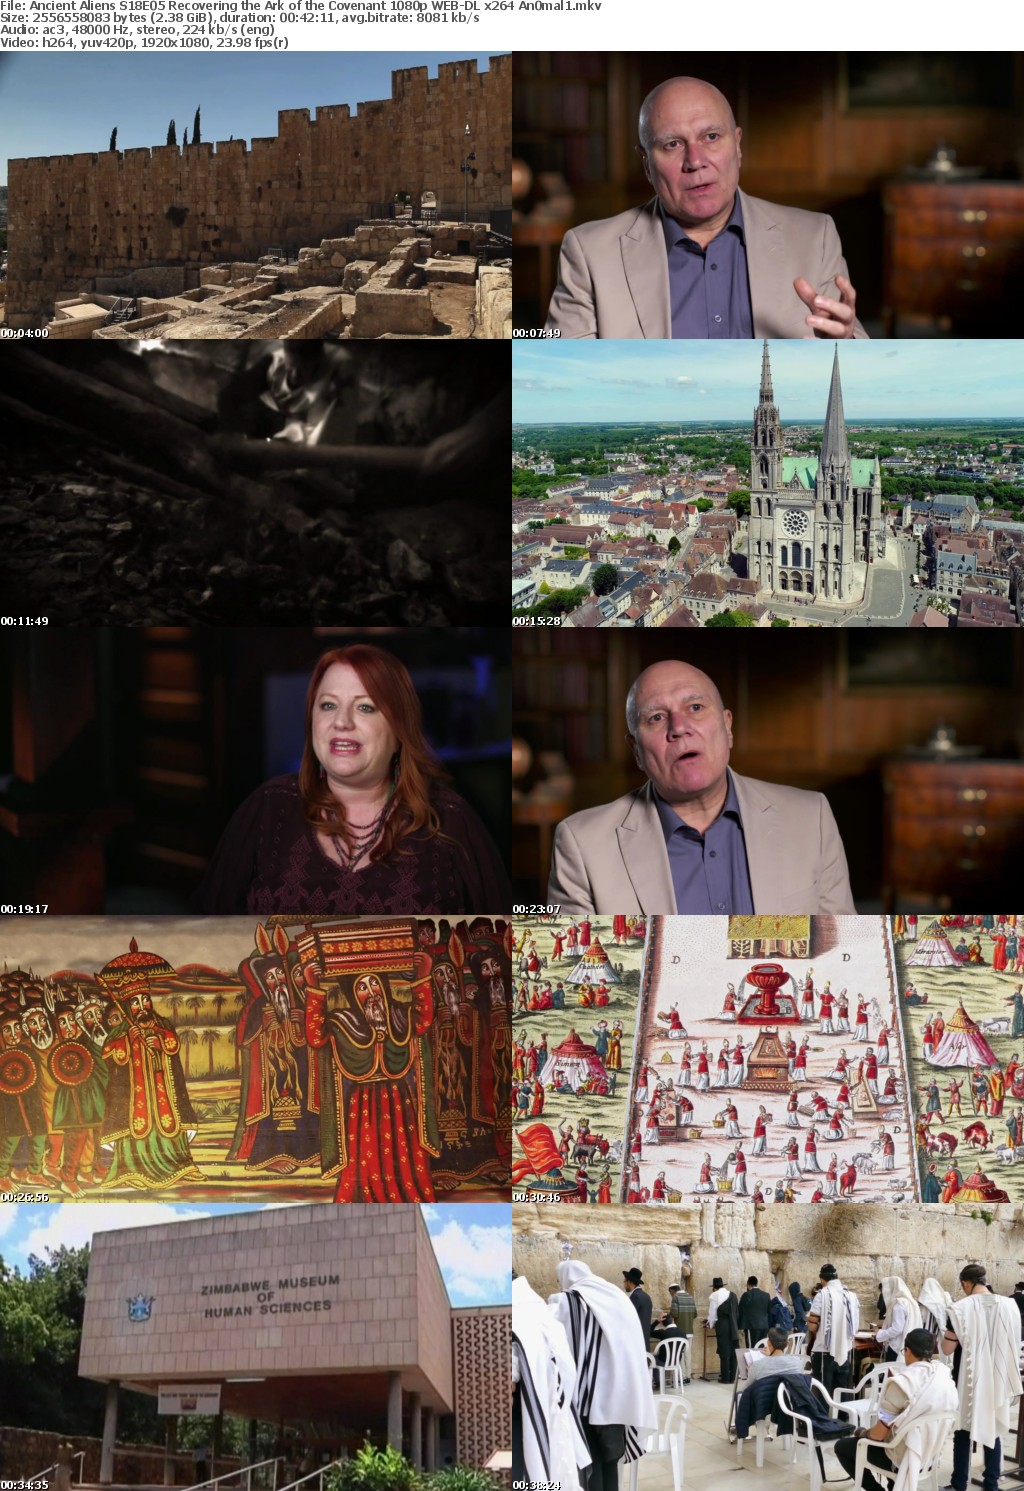 Ancient Aliens S18E05 Recovering the Ark of the Covenant 1080p WEB-DL x264 An0mal1